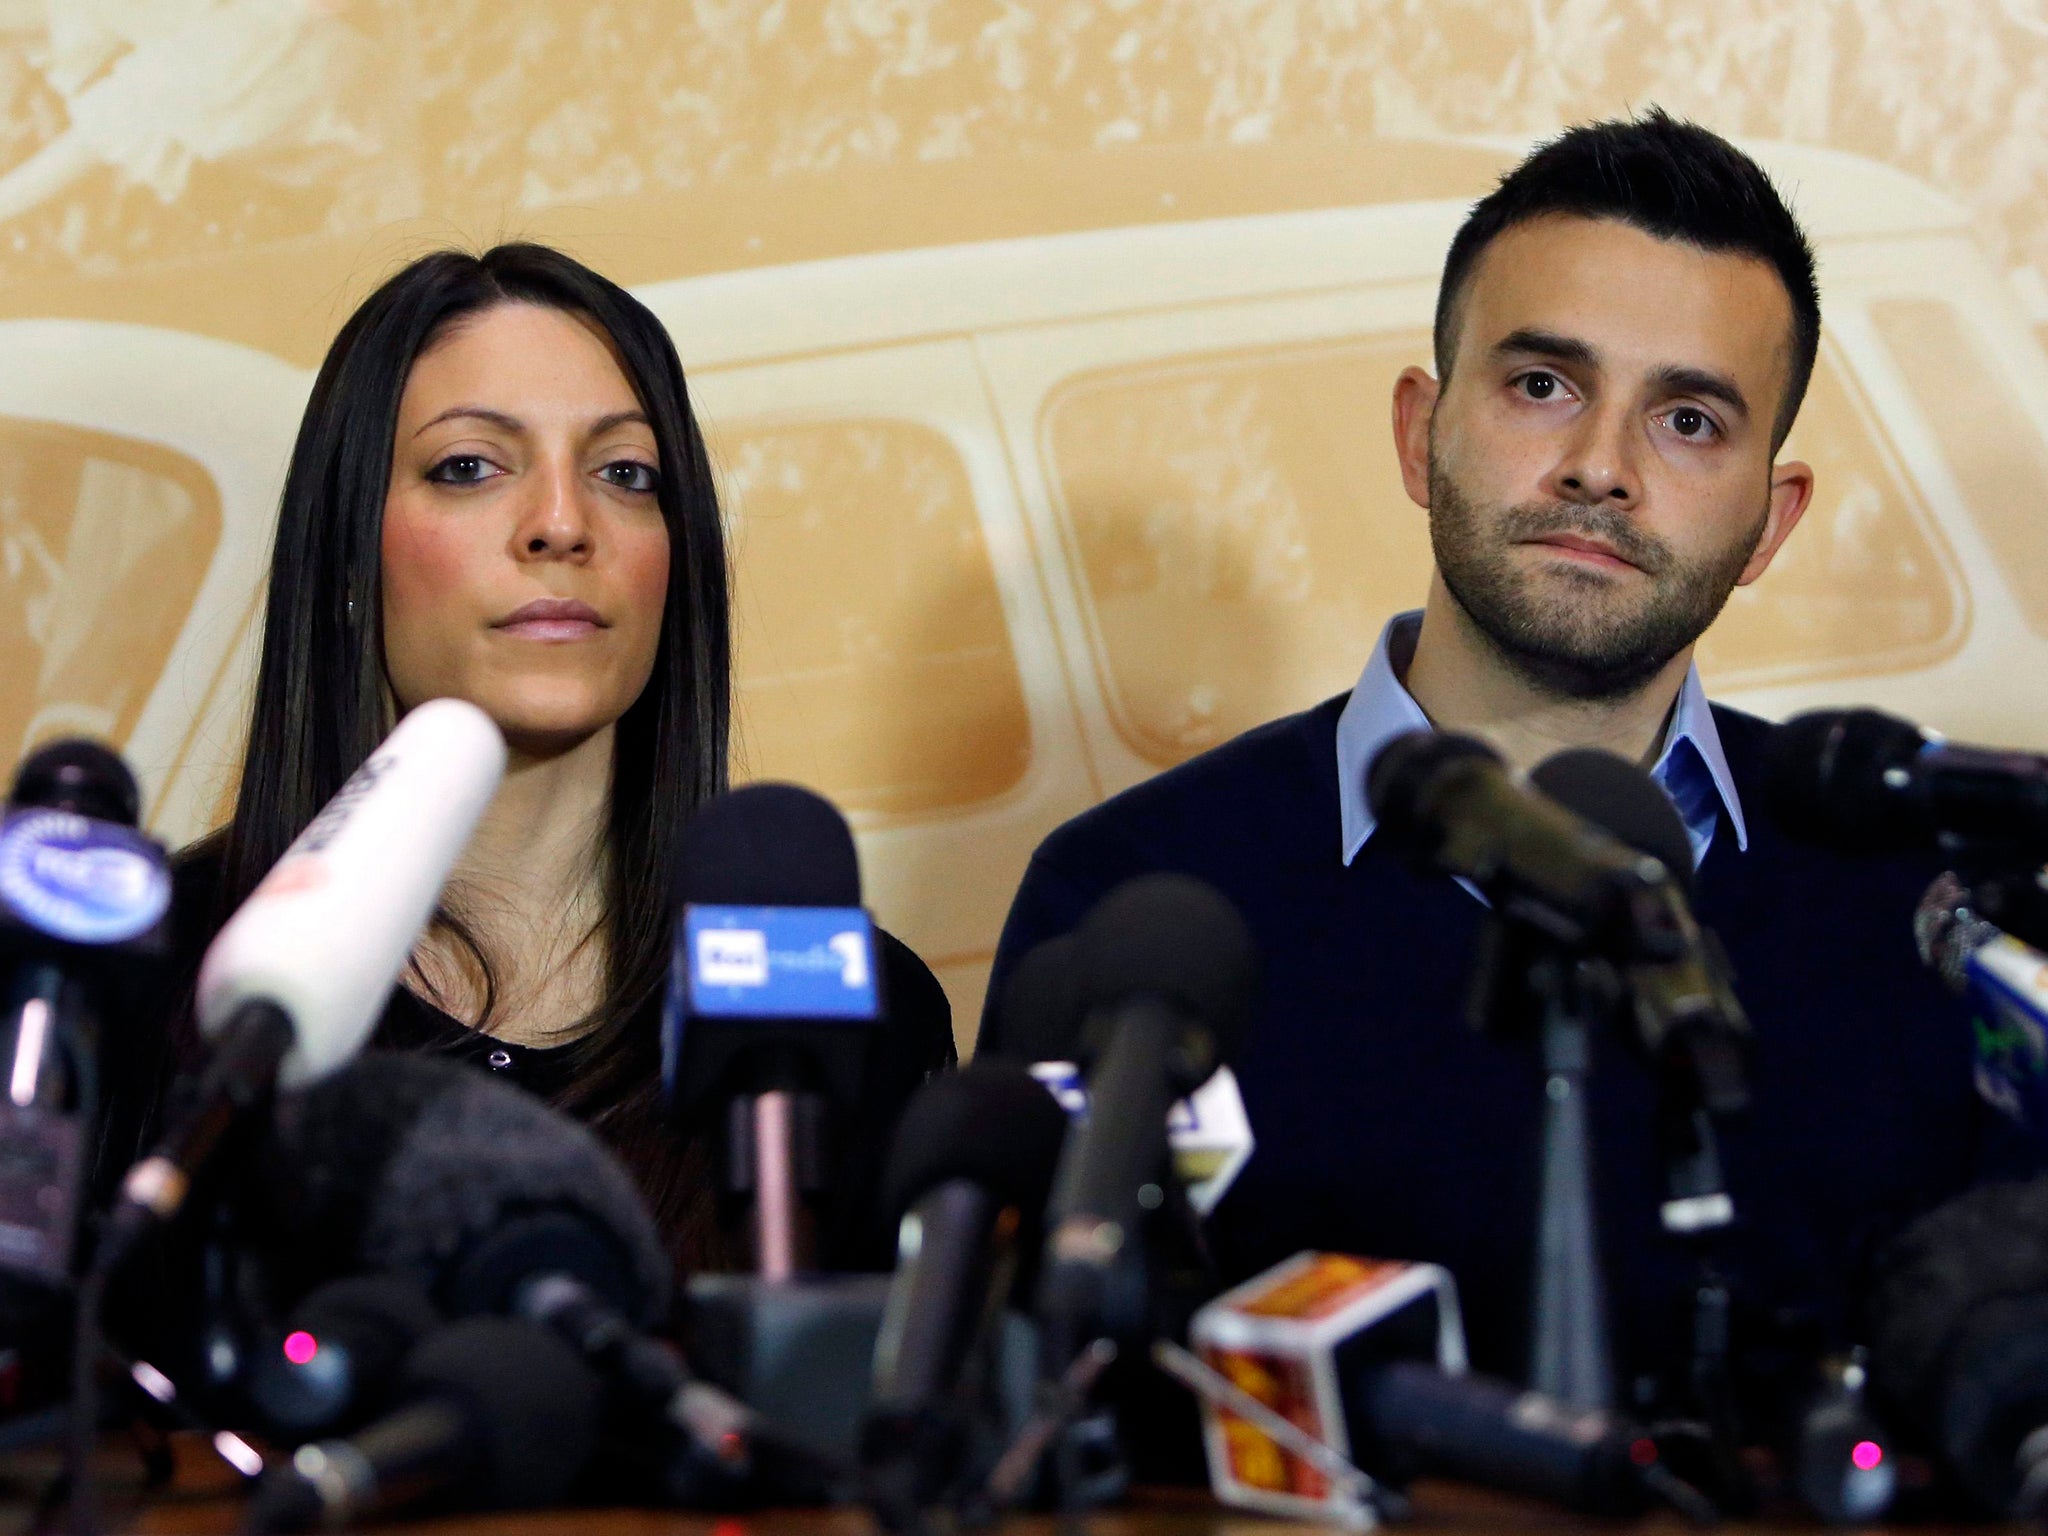 Stephanie Kercher (L) and Lyle Kercher, the sister and brother of murdered British student Meredith Kercher, attend a news conference in Florence